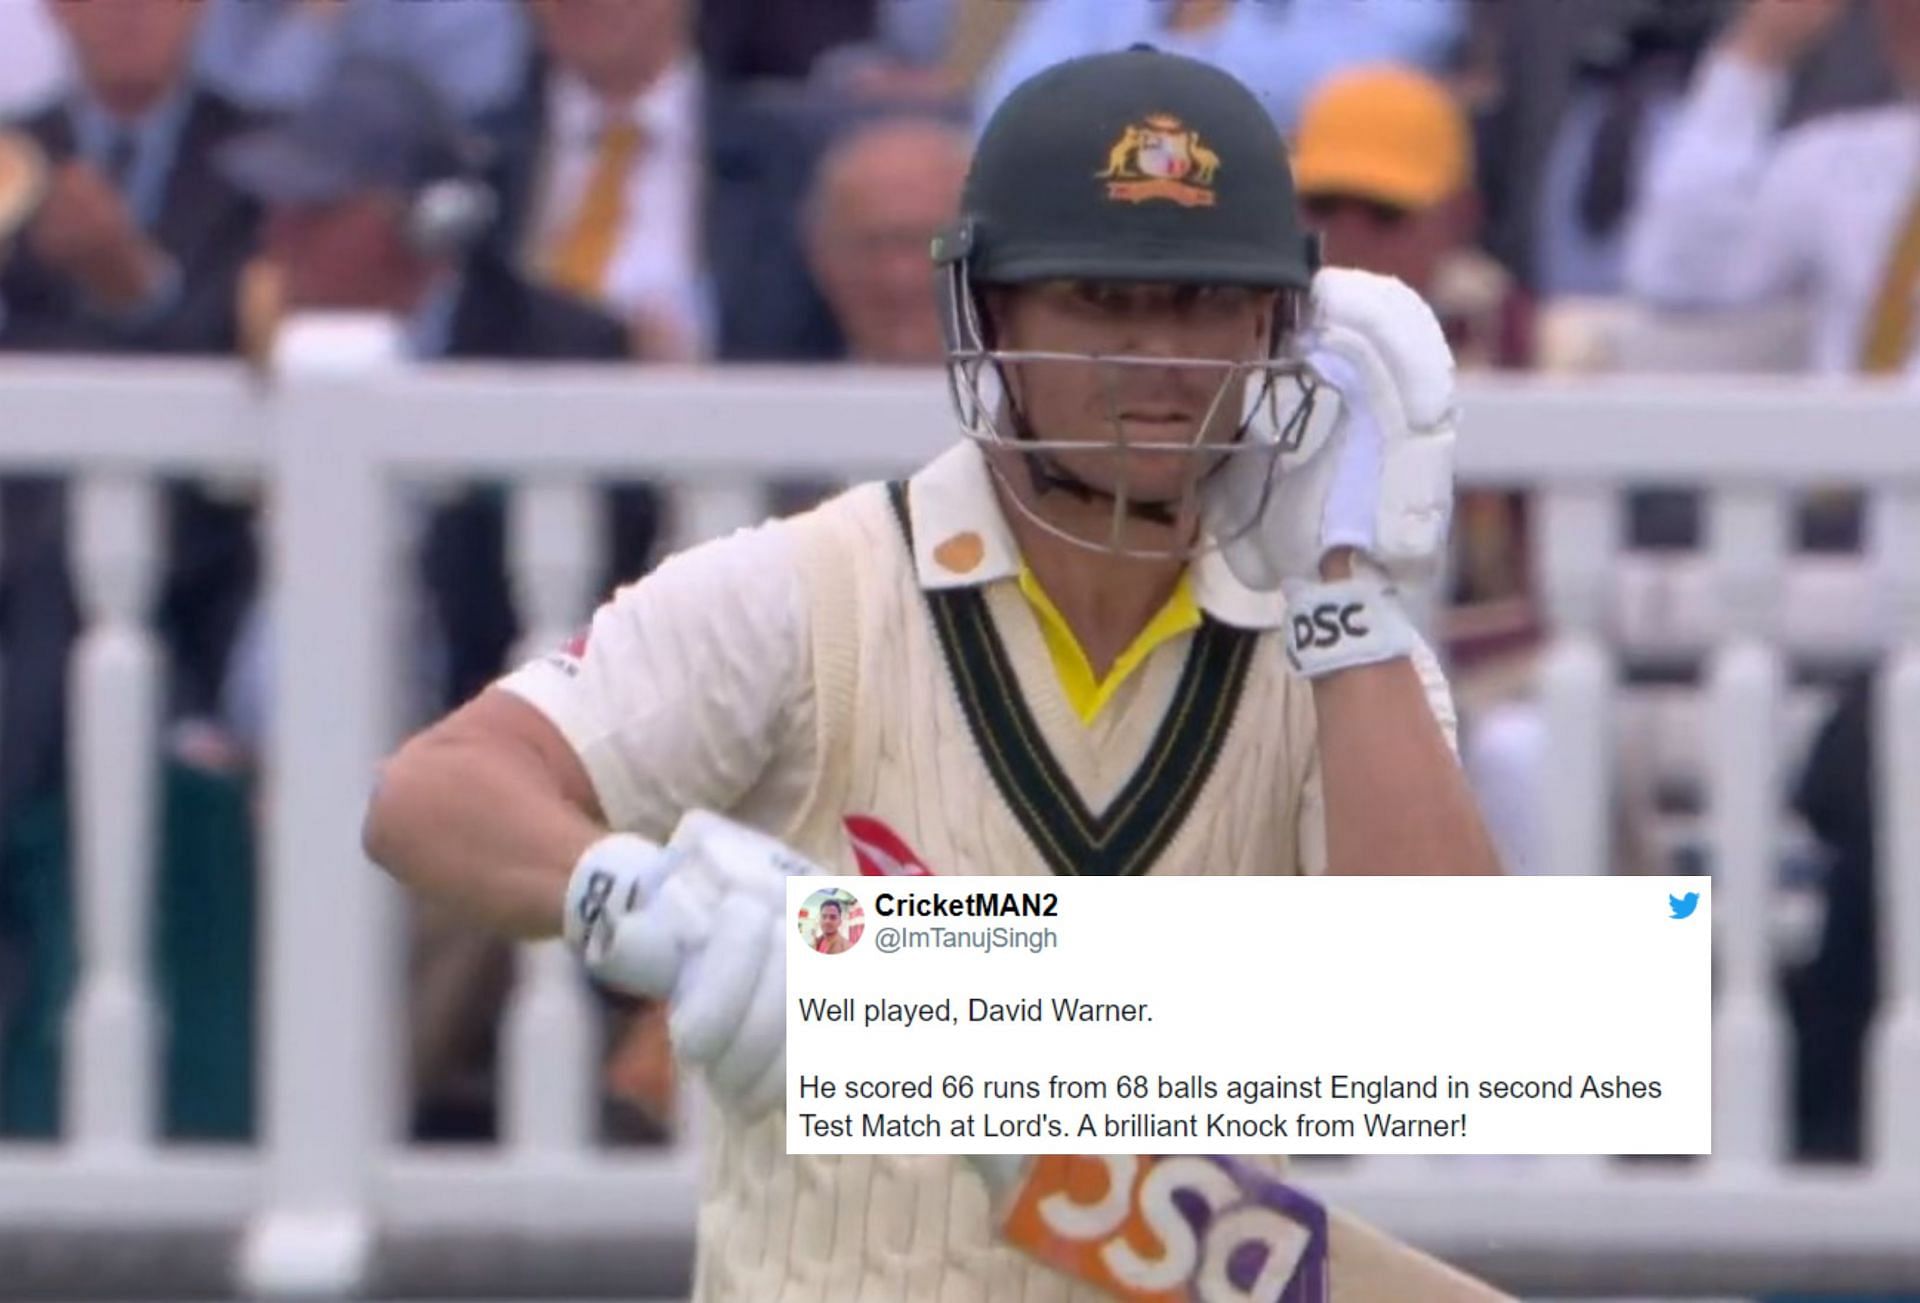 Fans applaud David Warner for his half-century in 2nd Ashes Test. 